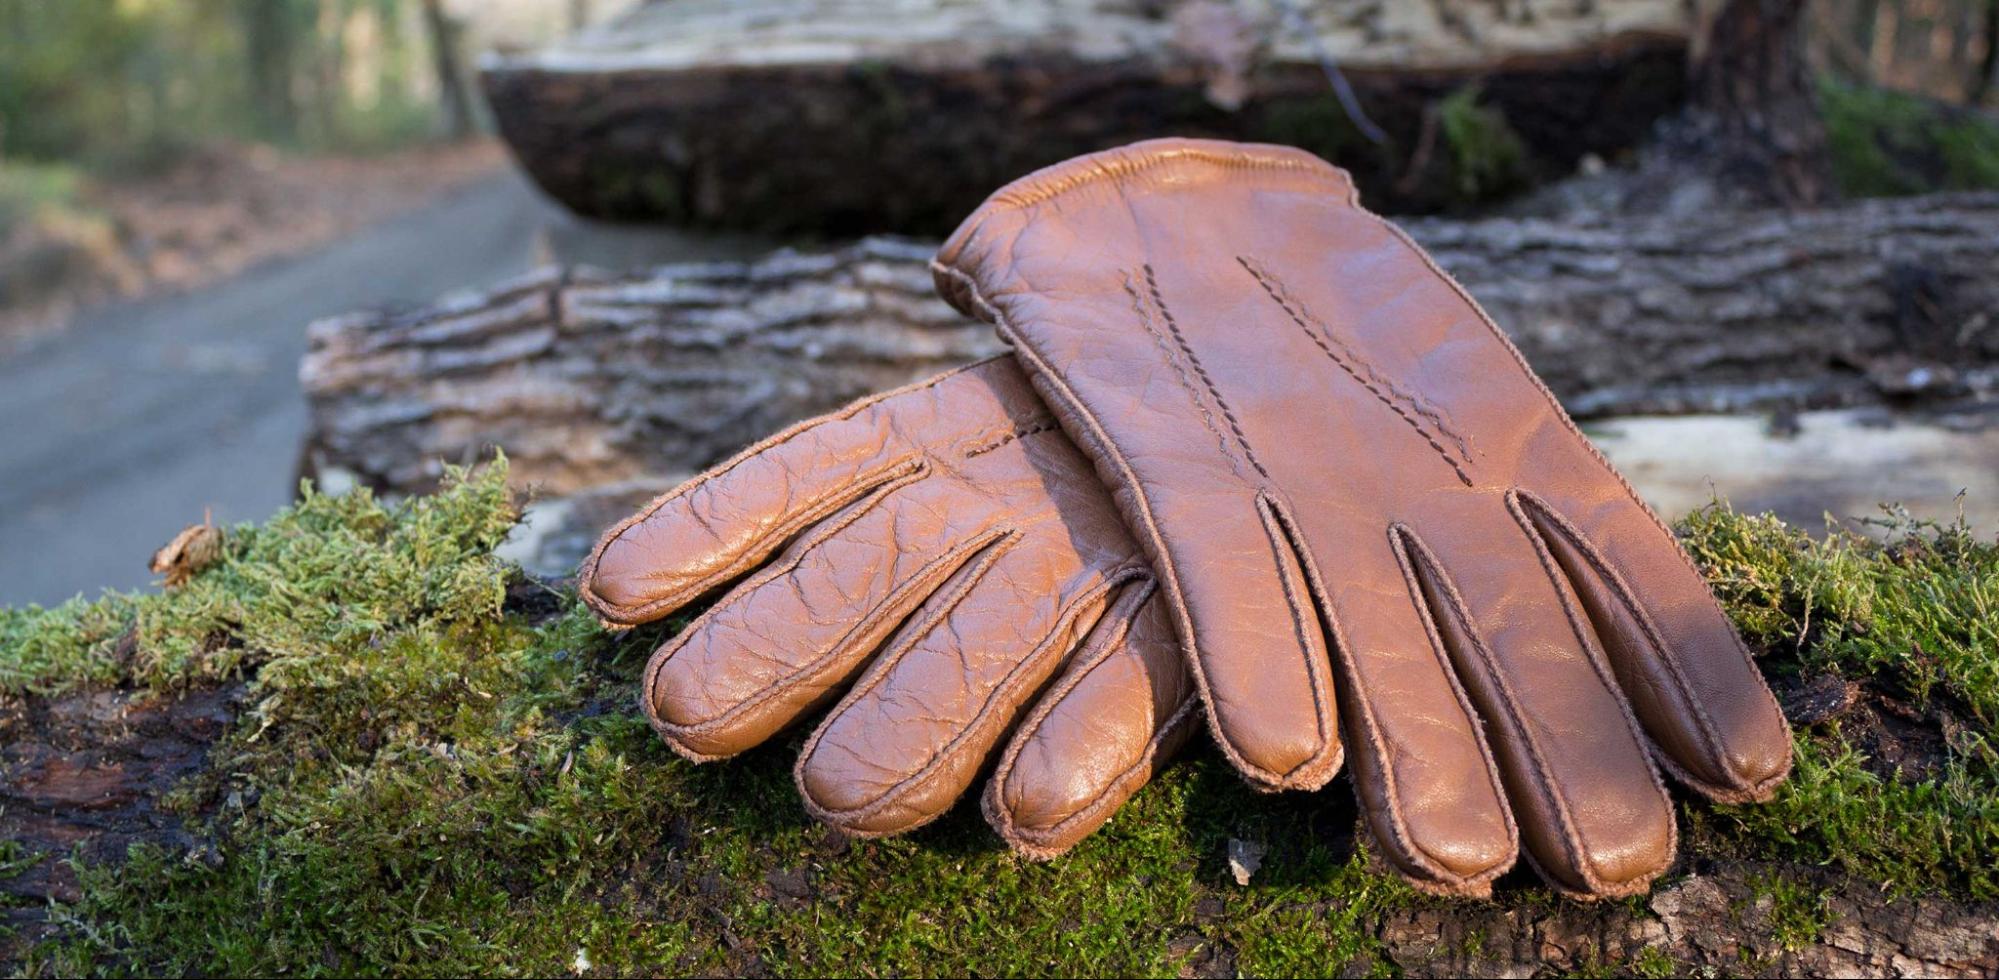 How To Shrink Leather Glove